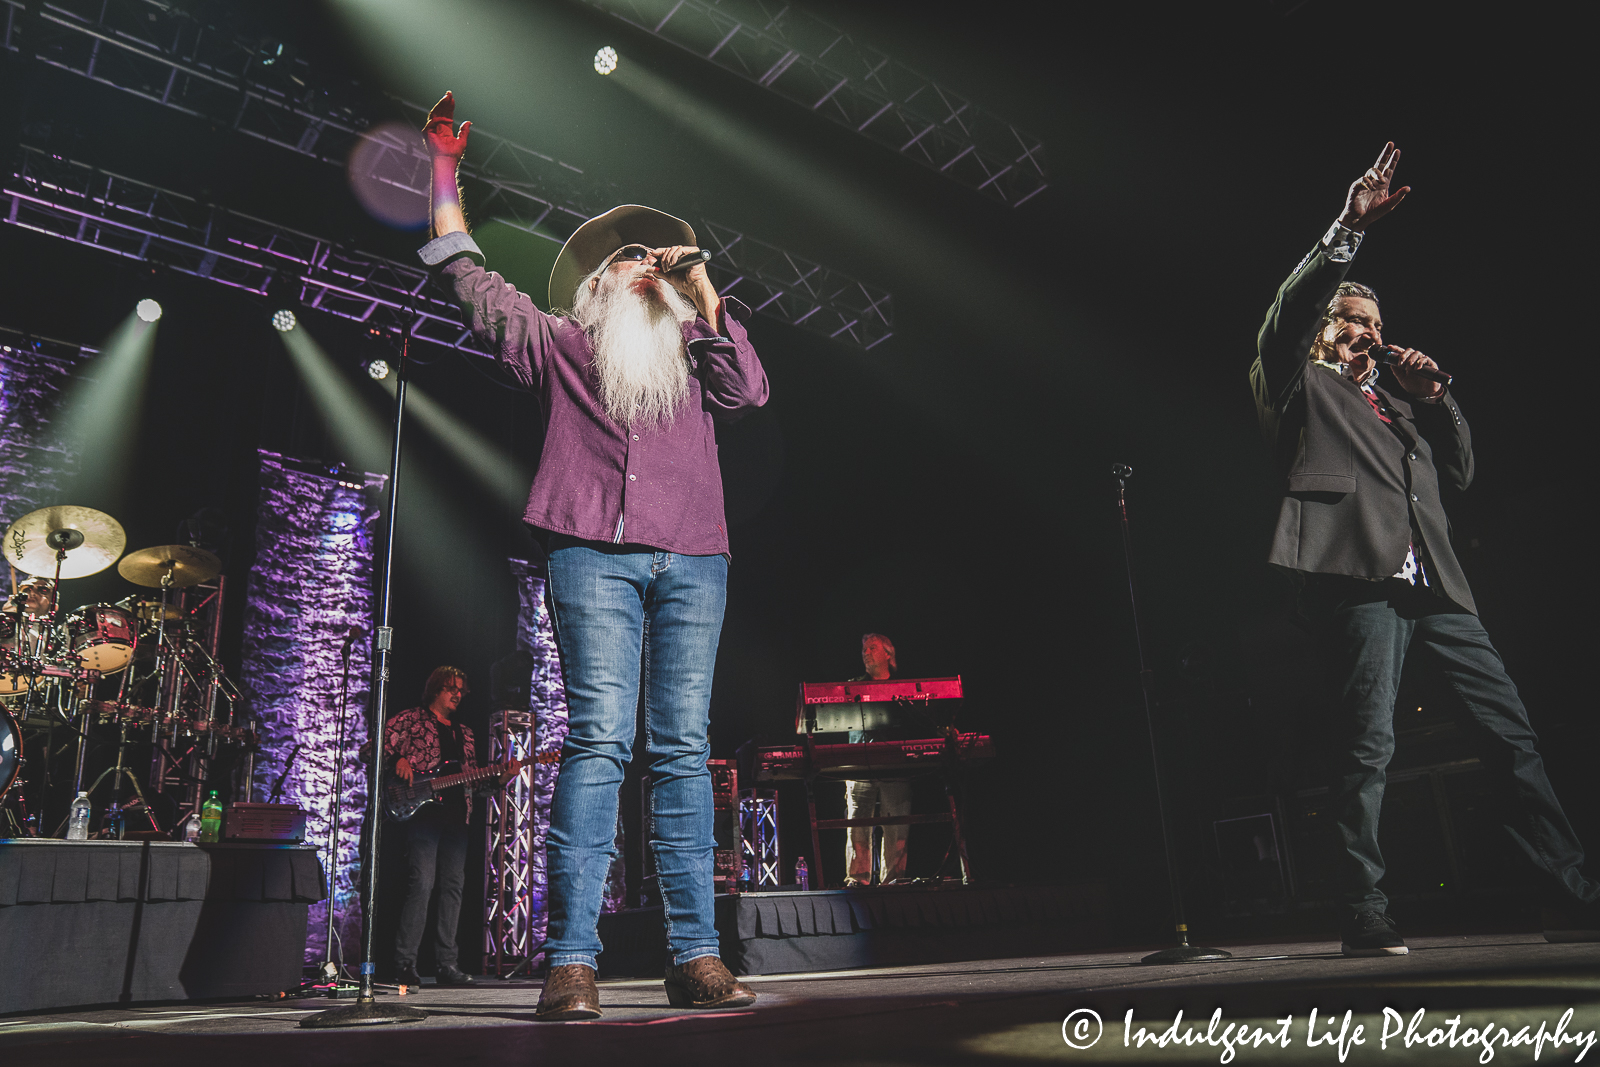 The Oak Ridge Boys members William Lee Golden and Richard Sterban live in concert together at Ameristar Casino in Kansas City, MO on July 15, 2022.